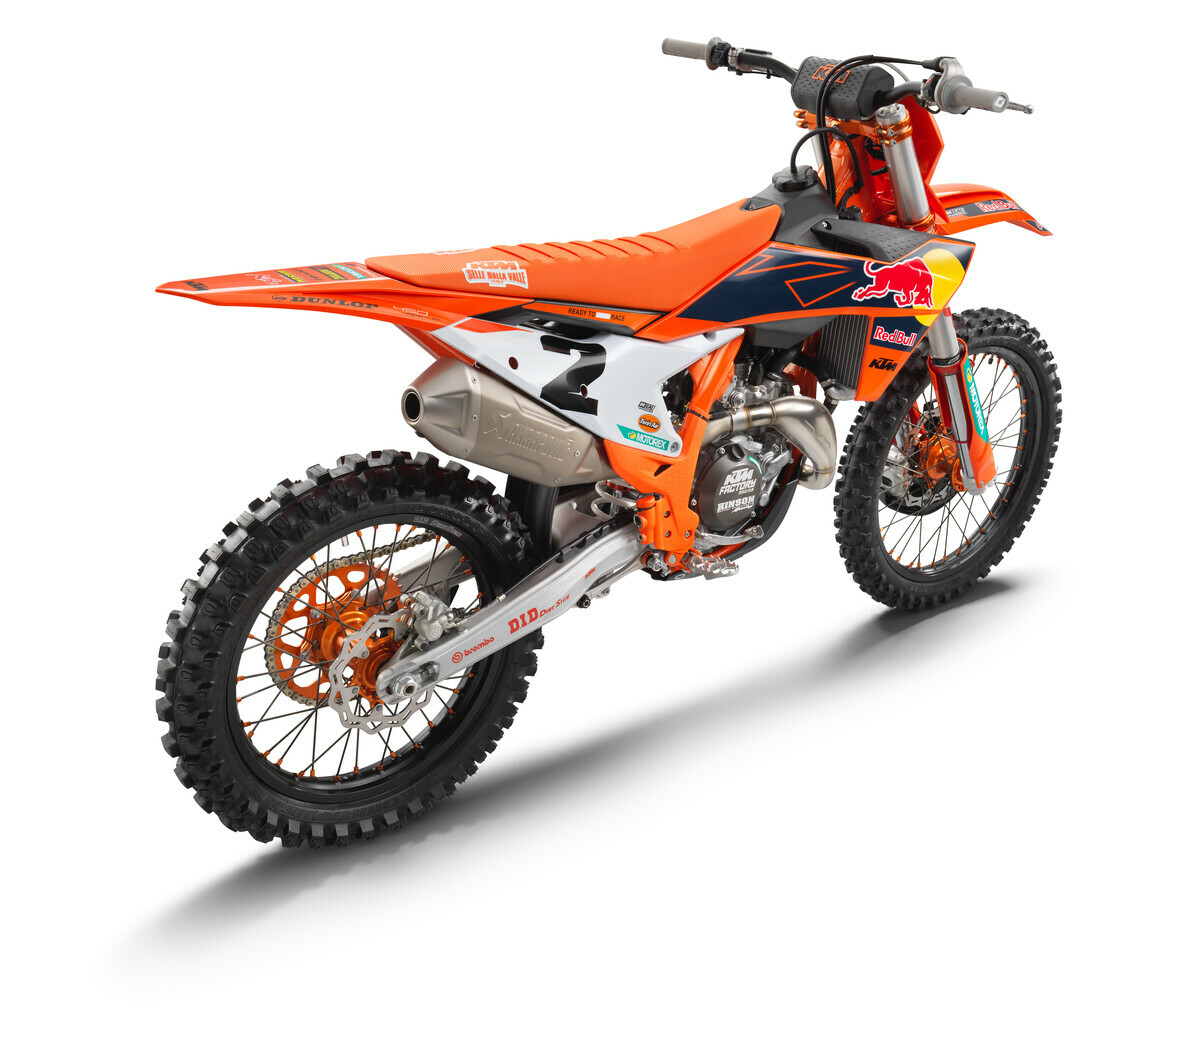 Factory Edition 2023 KTM 450 SXF Released Racer X